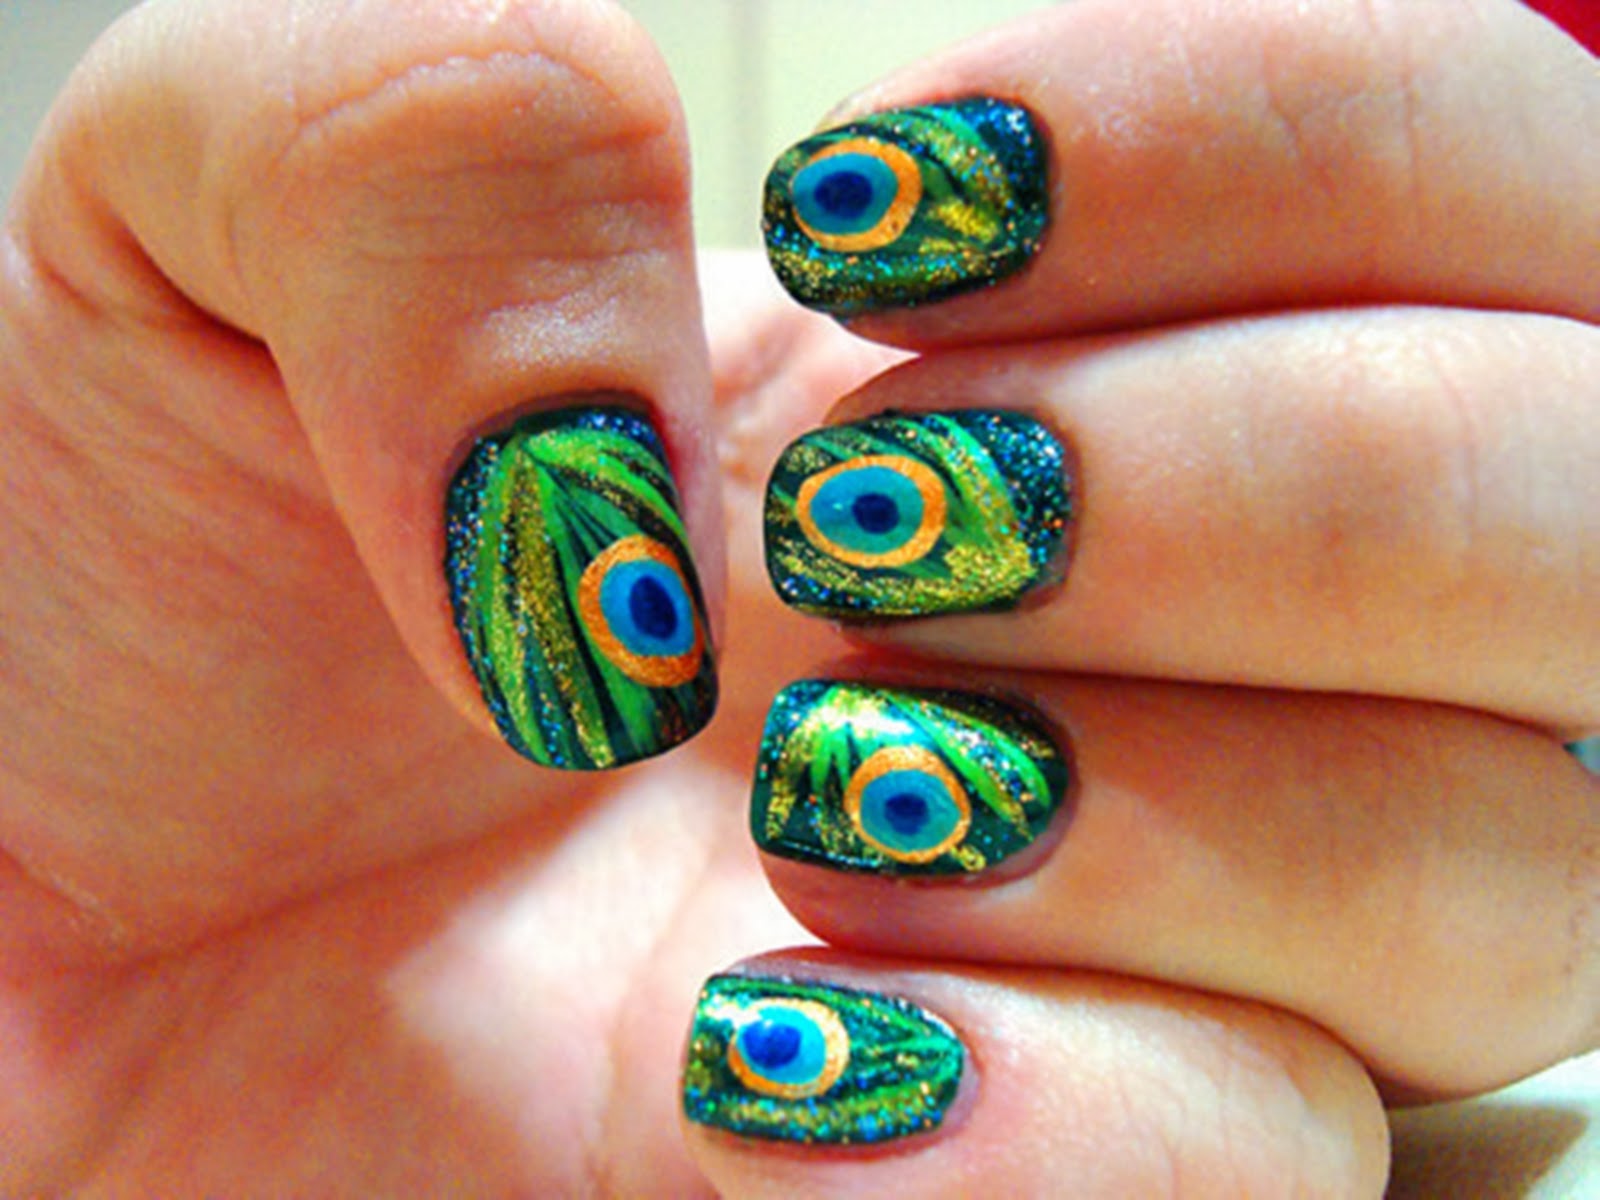 3. "Step-by-Step Peacock Nail Art Design" - wide 2